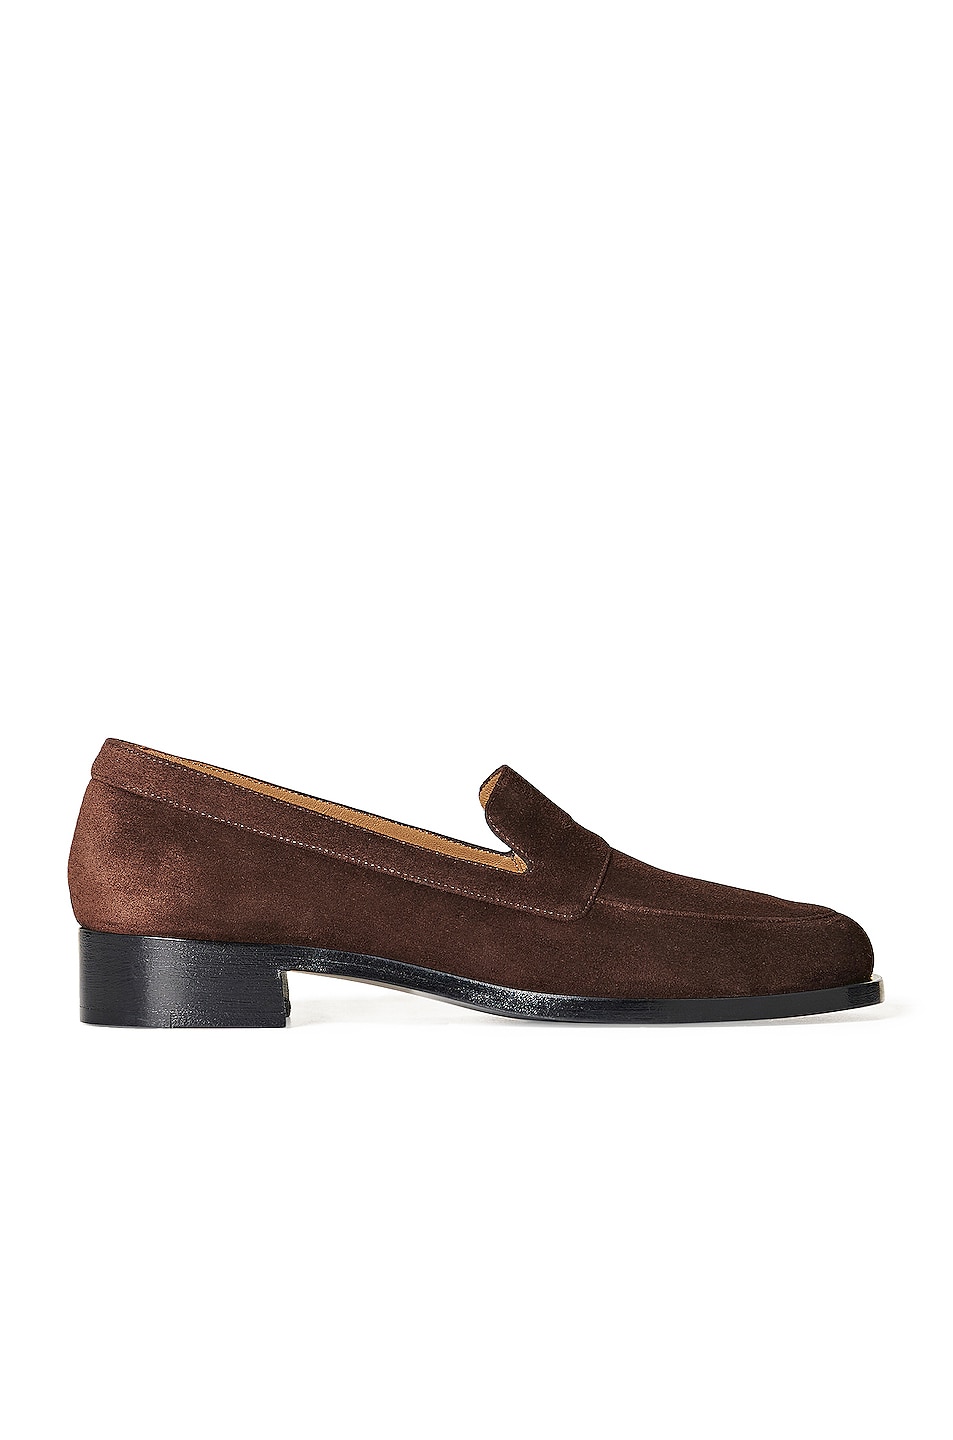 Image 1 of The Row Garcon Suede Loafers in Mocha